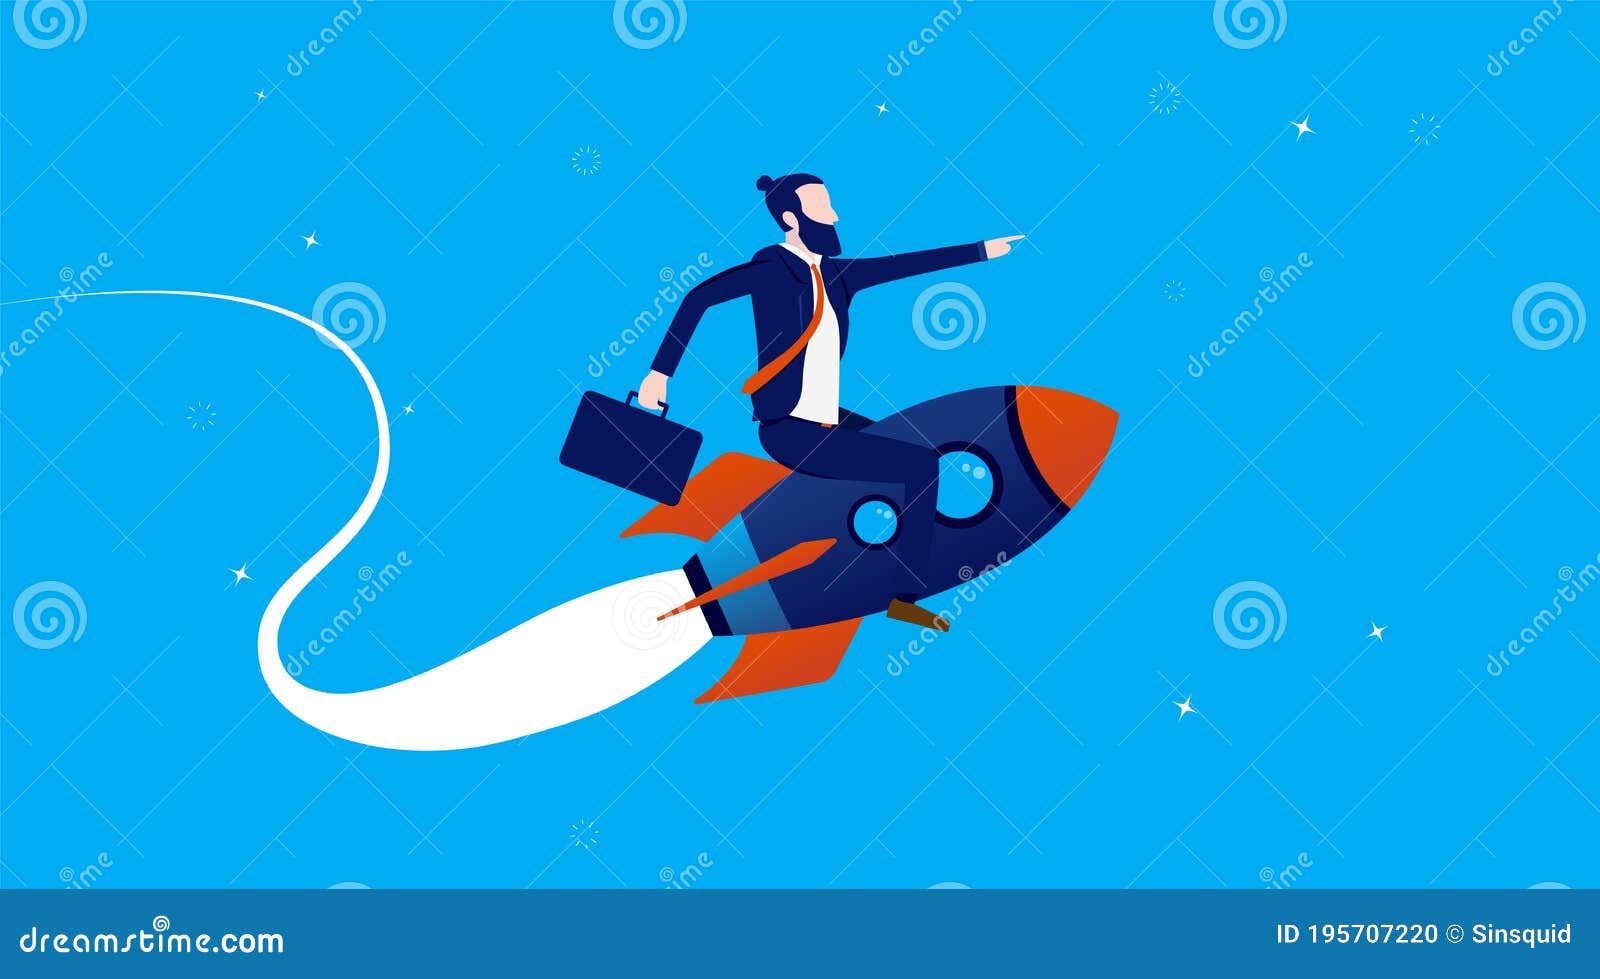 Success Rocket - Businessman Going Fast Pointing the Way Forward Stock  Vector - Illustration of future, marketing: 195707220